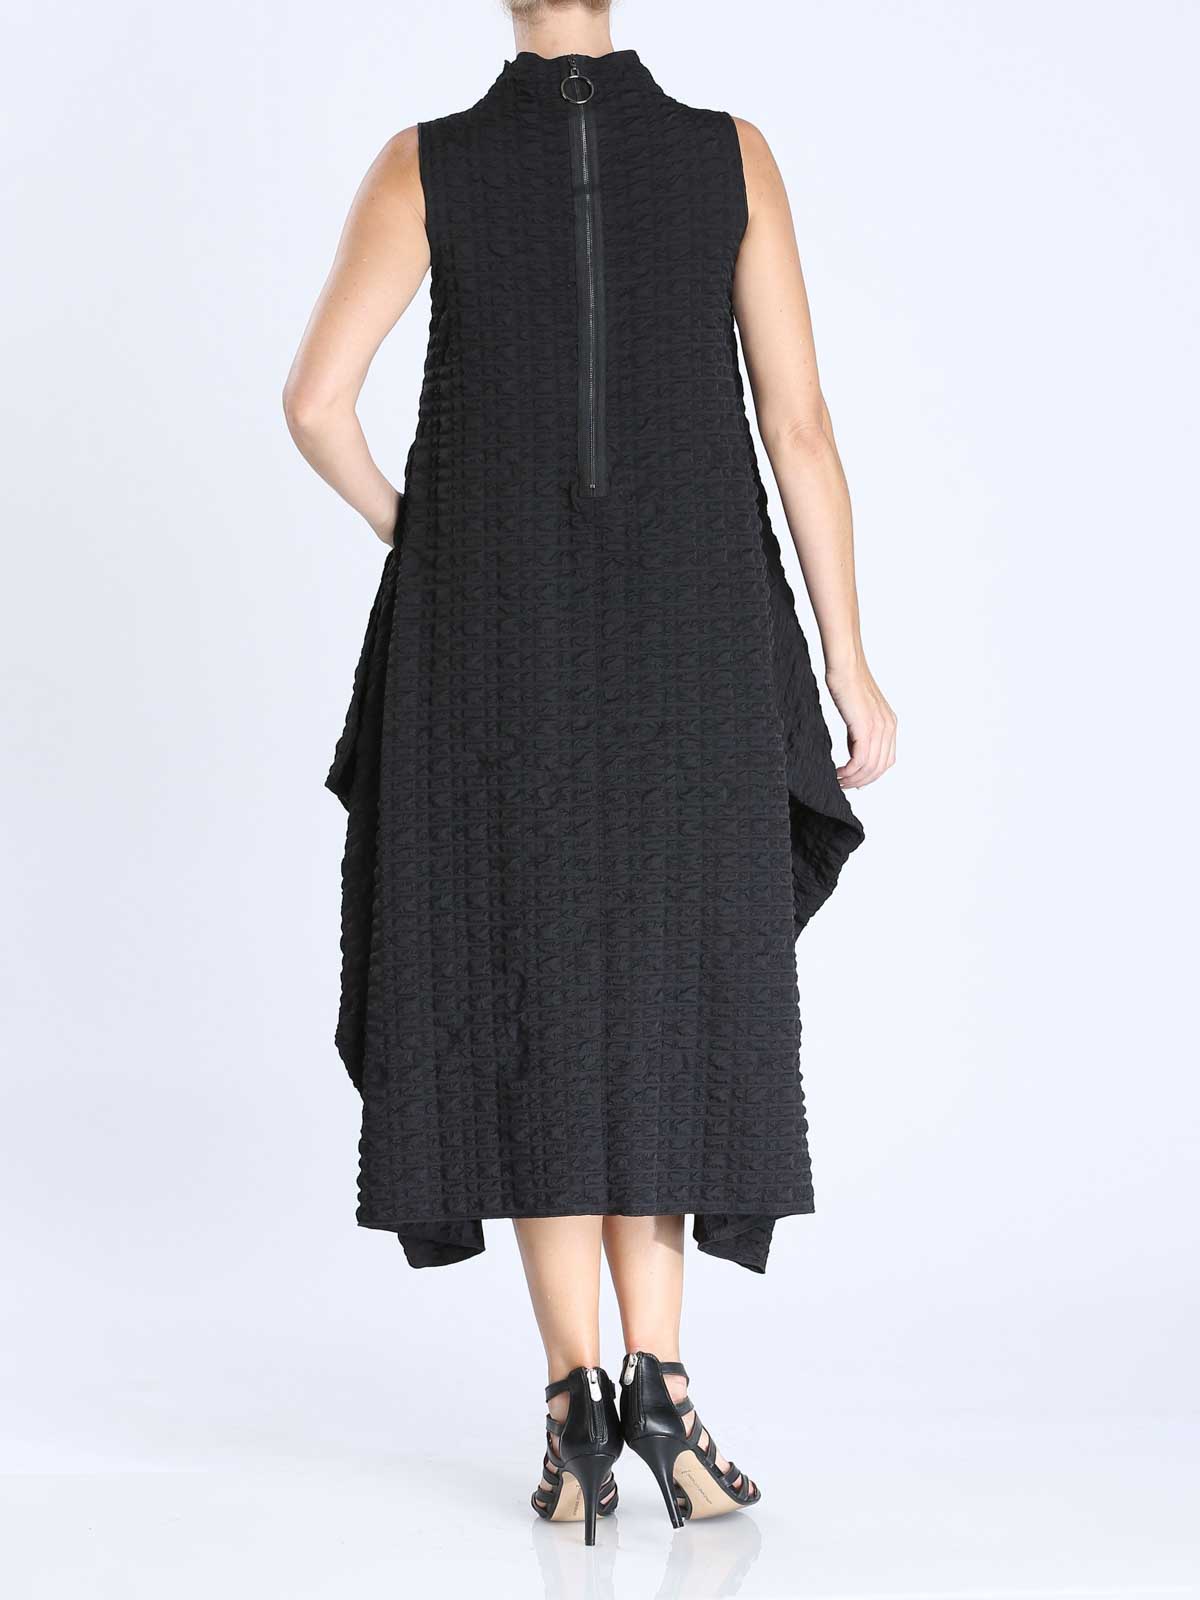 IC Collection Check Pucker Sleeveless High Neck Dress, Black - Statement Boutique